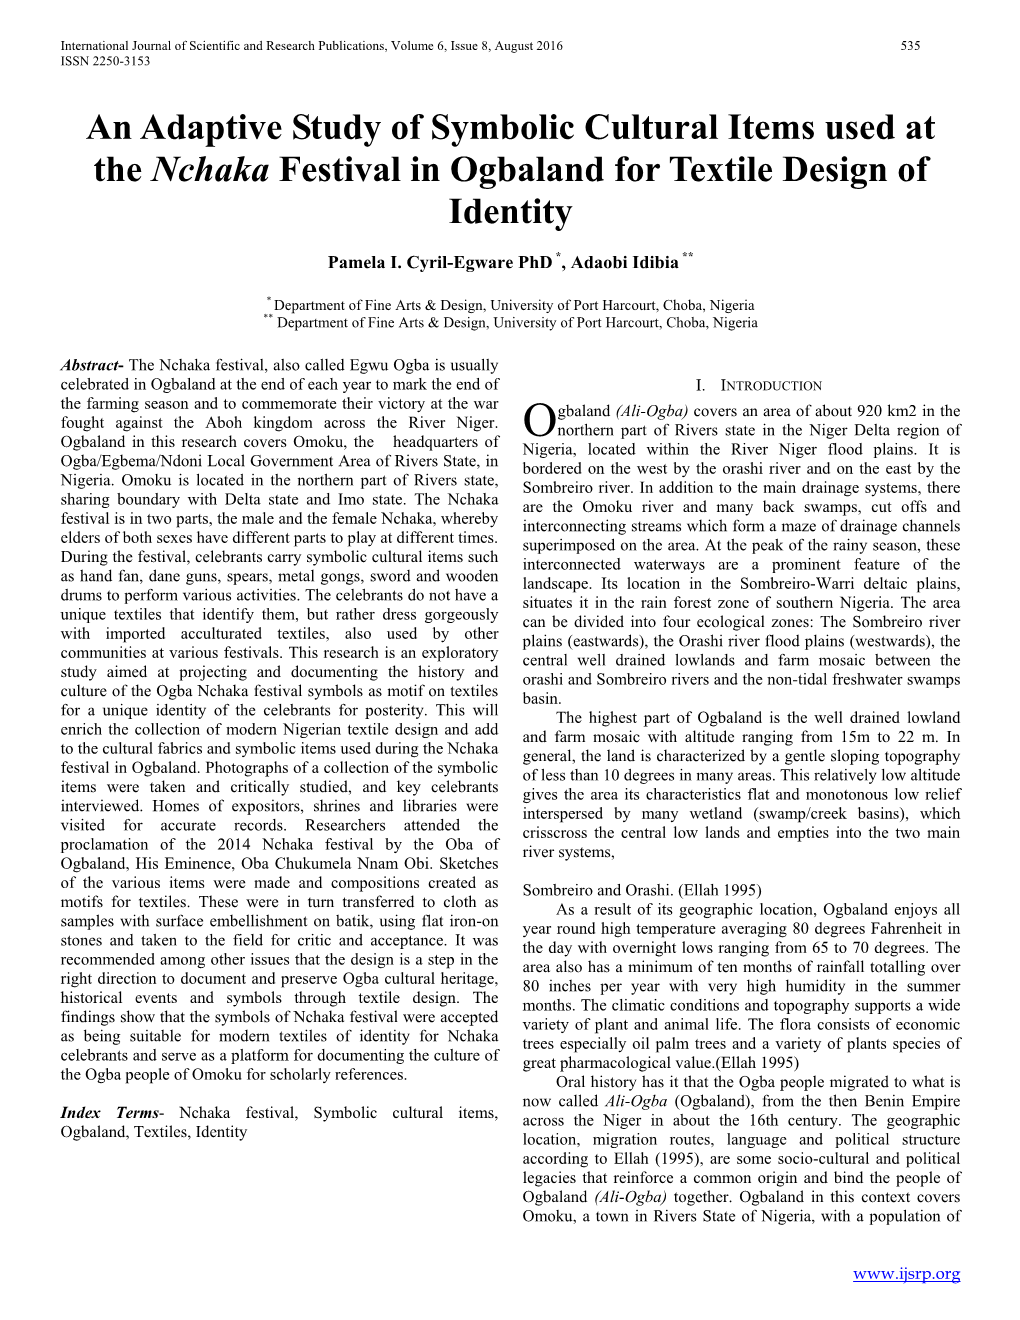 An Adaptive Study of Symbolic Cultural Items Used at the Nchaka Festival in Ogbaland for Textile Design of Identity